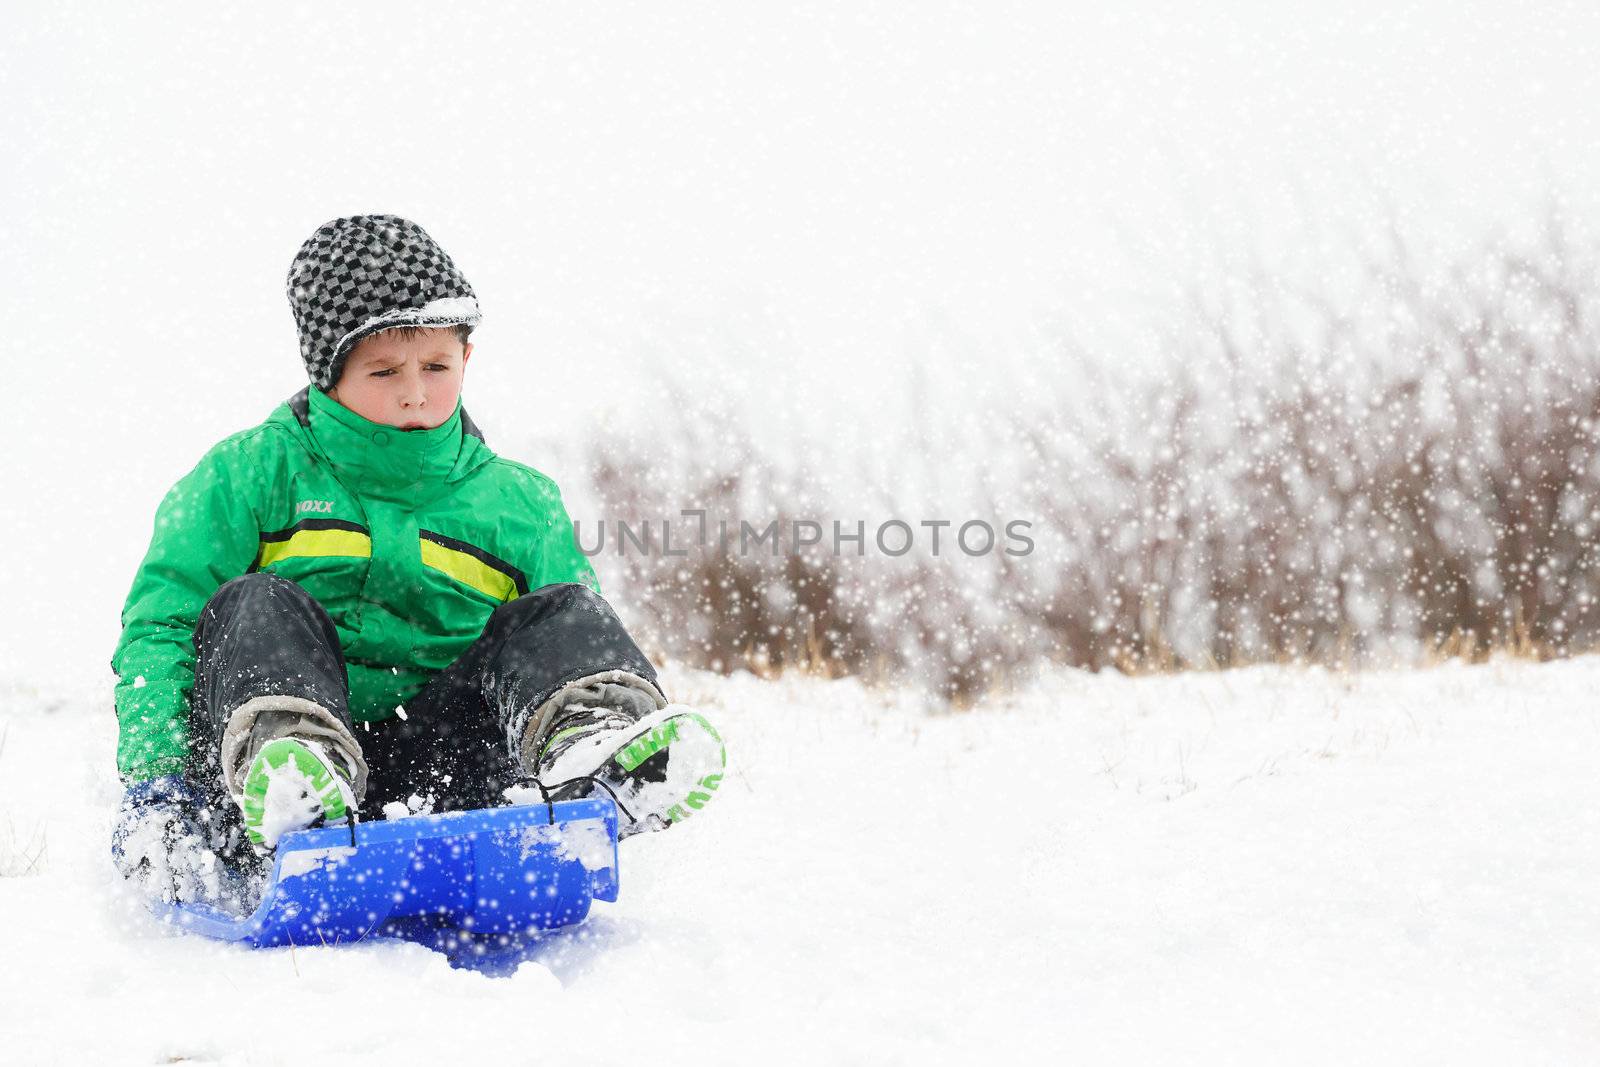 A young boy shows his excitement sledding down a hill in winter